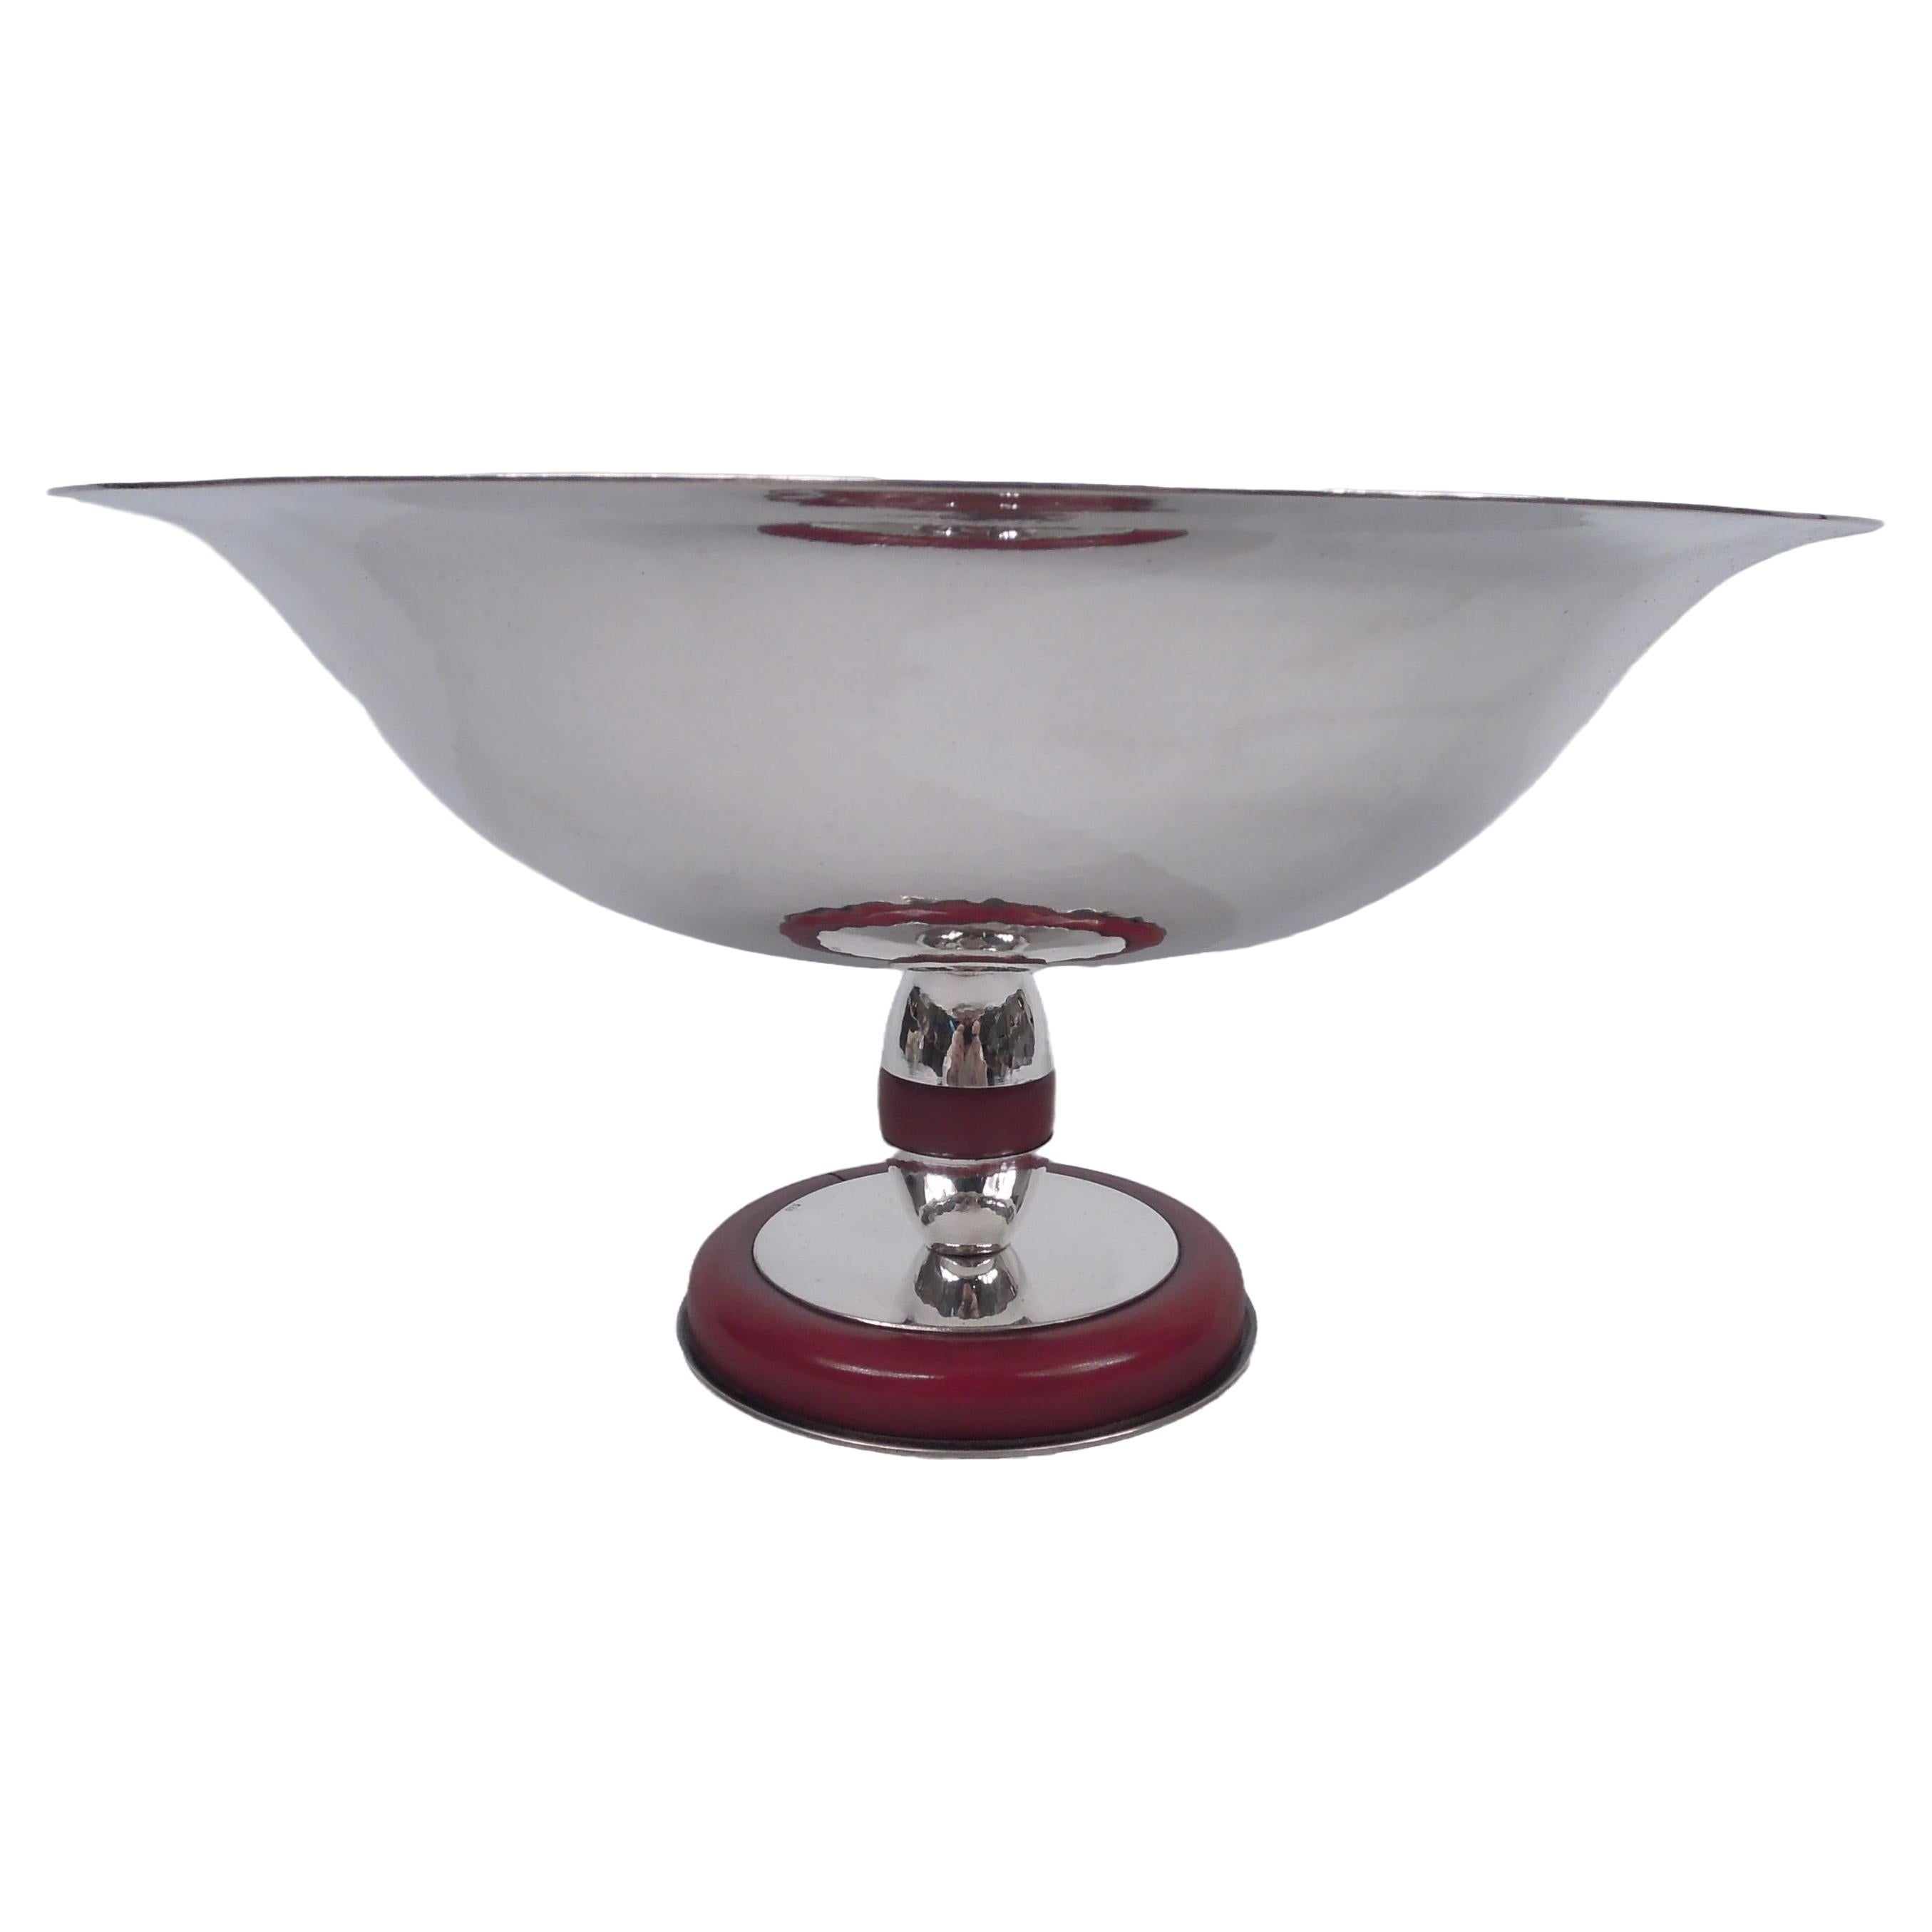 Super Stylish Italian Art Deco Sterling Silver and Bakelite Compote For Sale